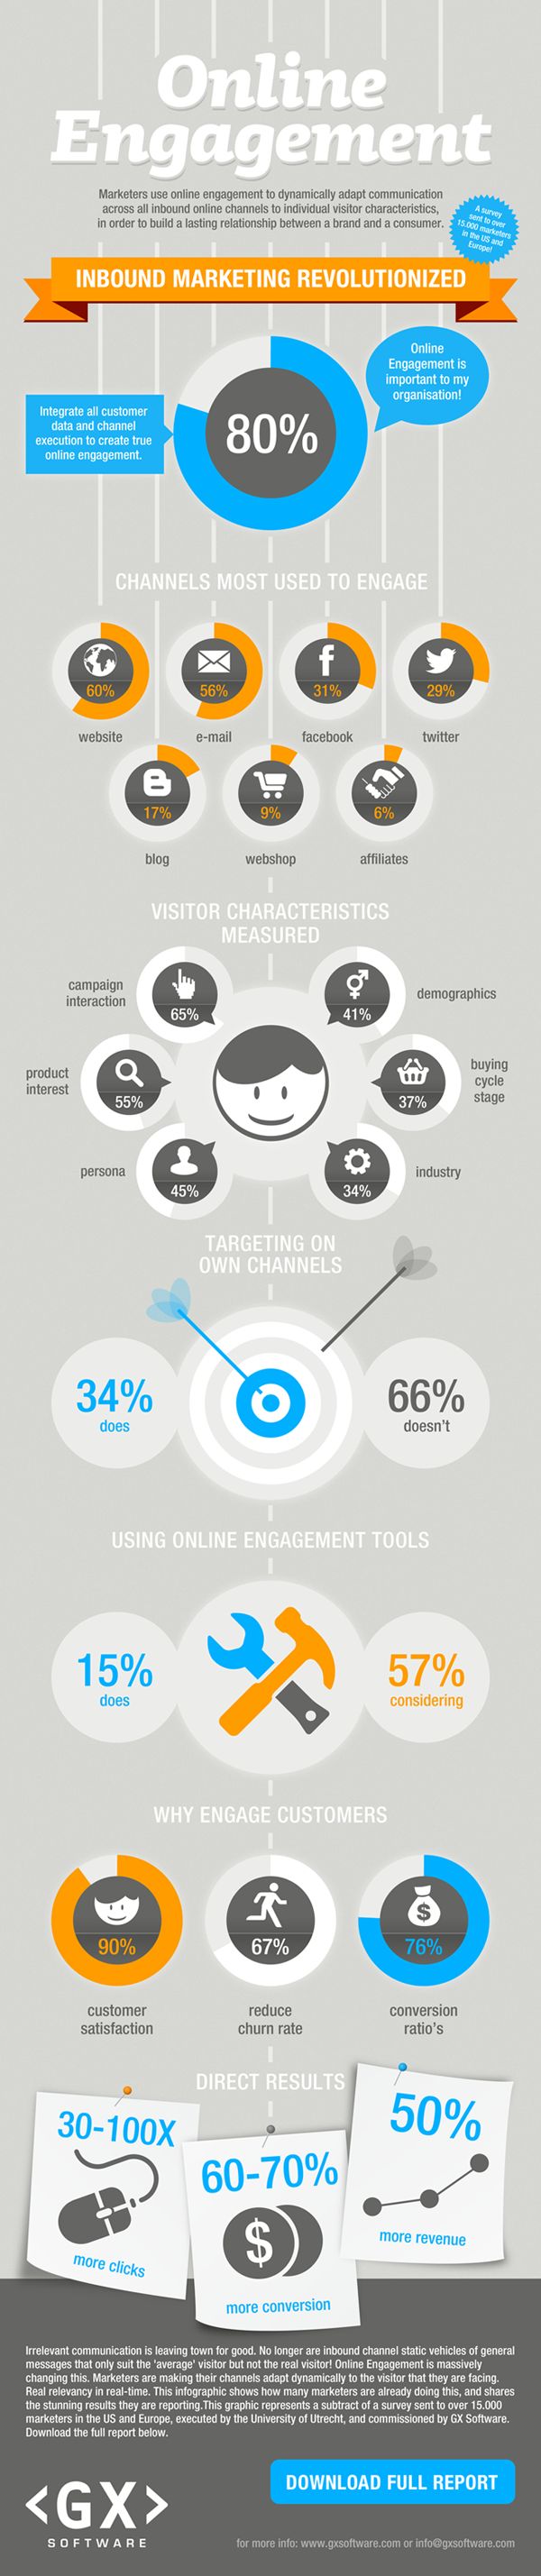 The State of Online Engagement in 2012